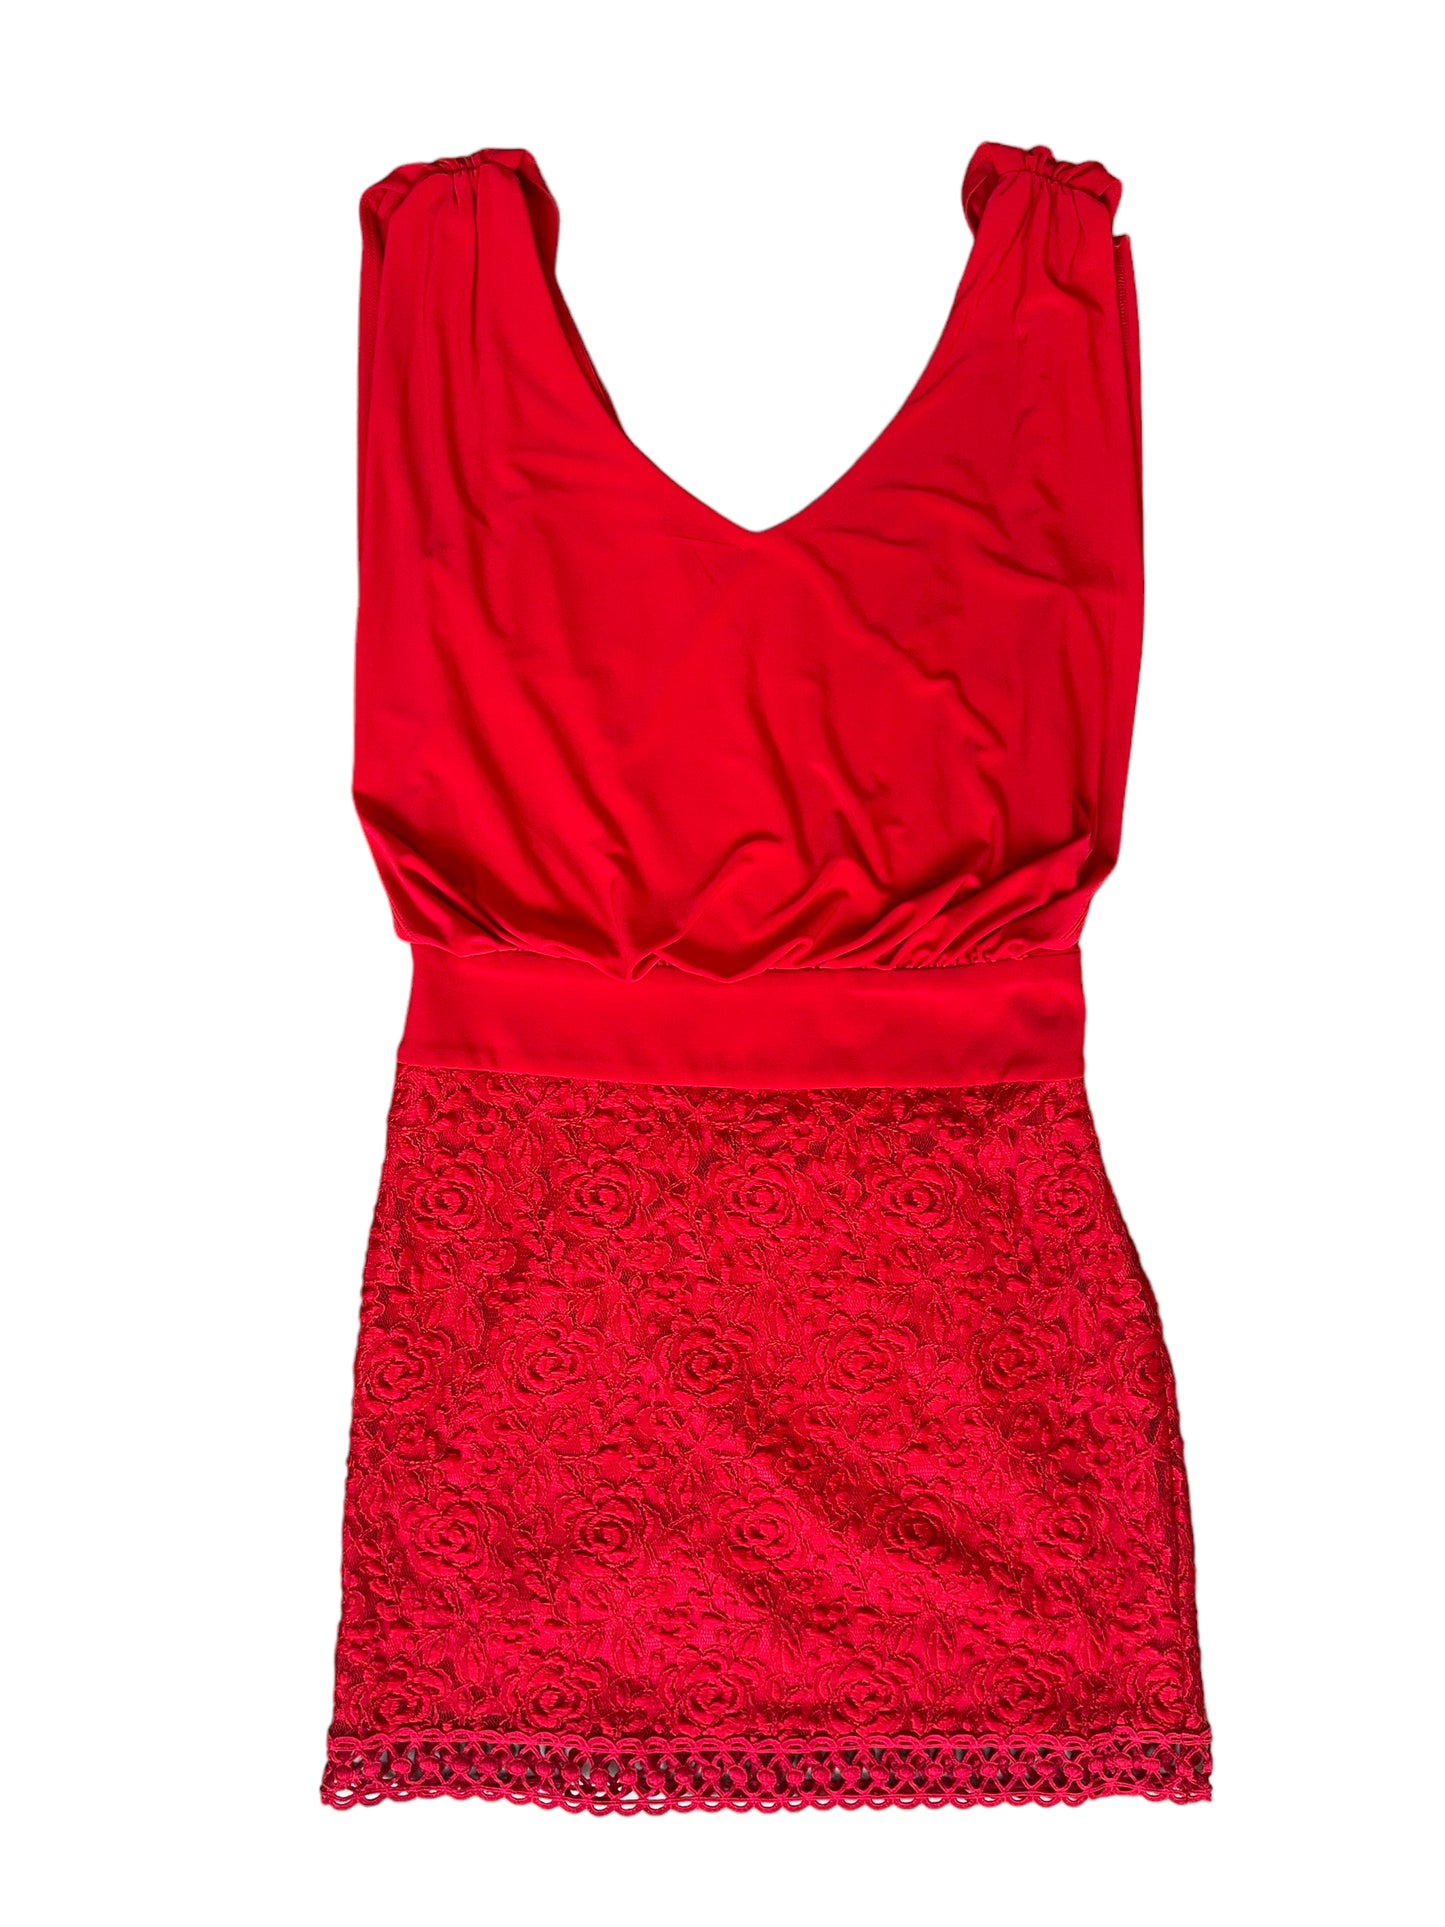 Laundry By Shelli Segal Red Lace Dress Size 8